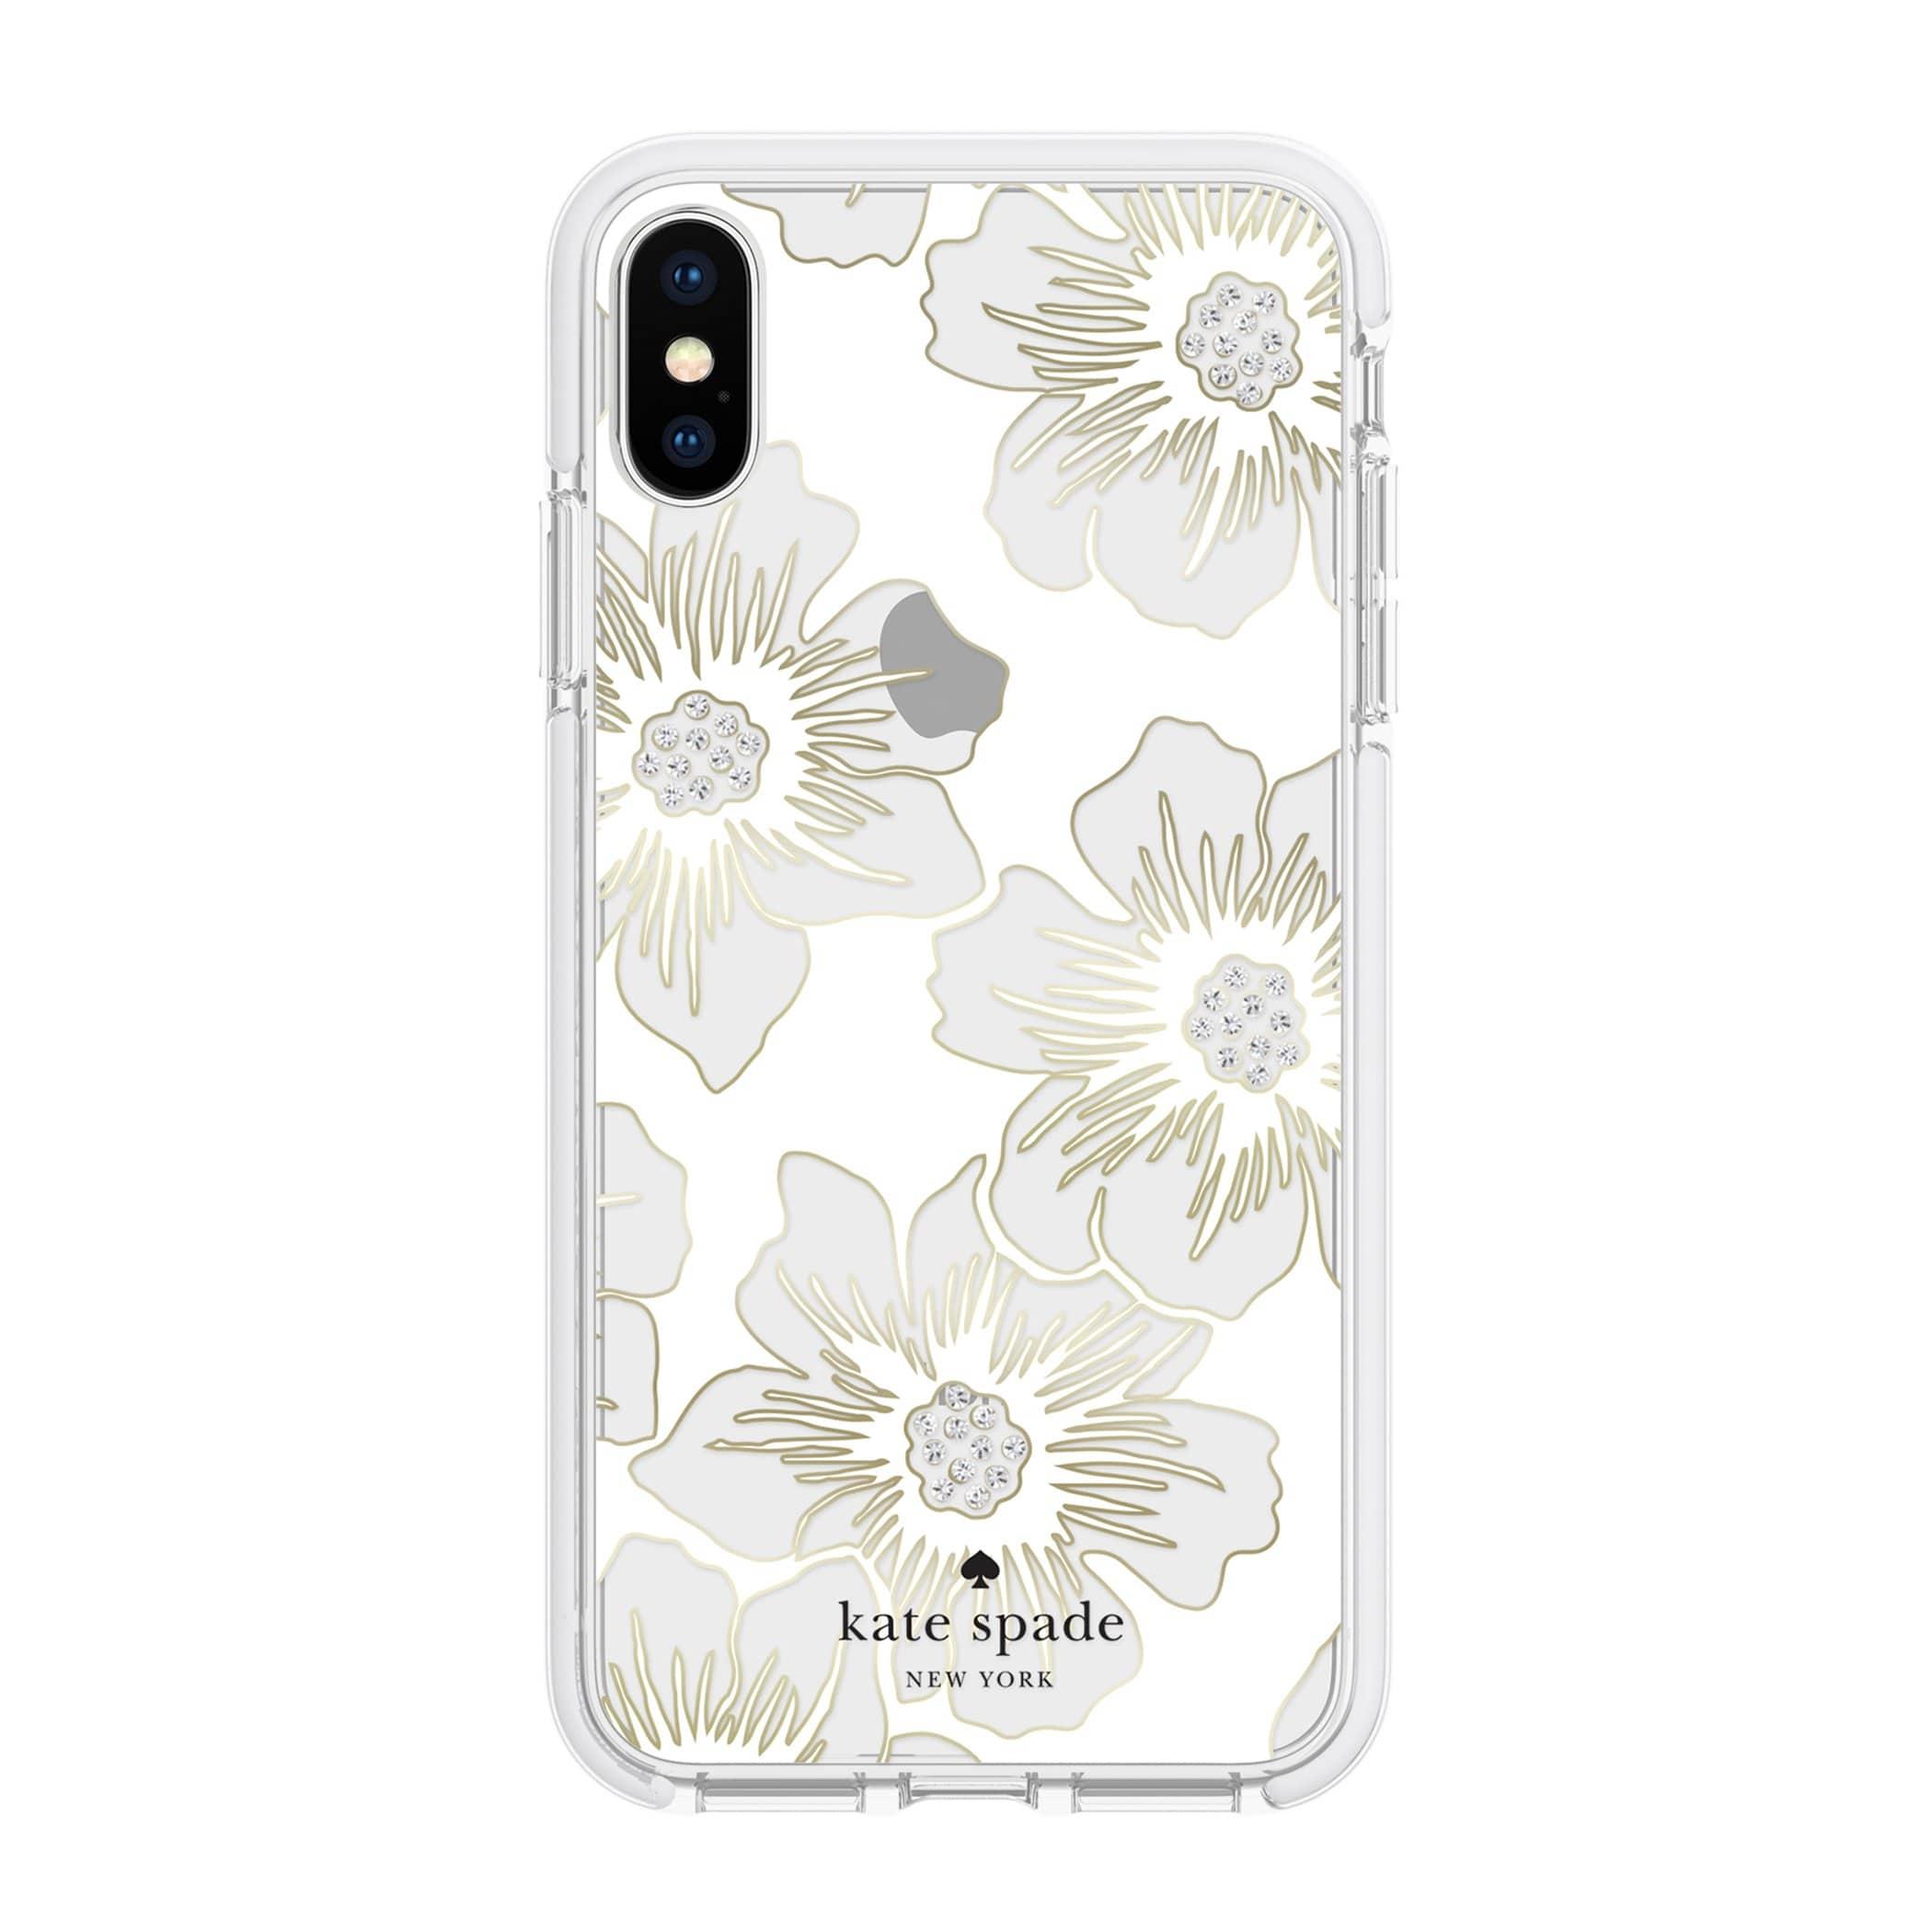 kate spade new york iphone xs x defensive hardshell case reverse hollyhock floral clear cream with stones